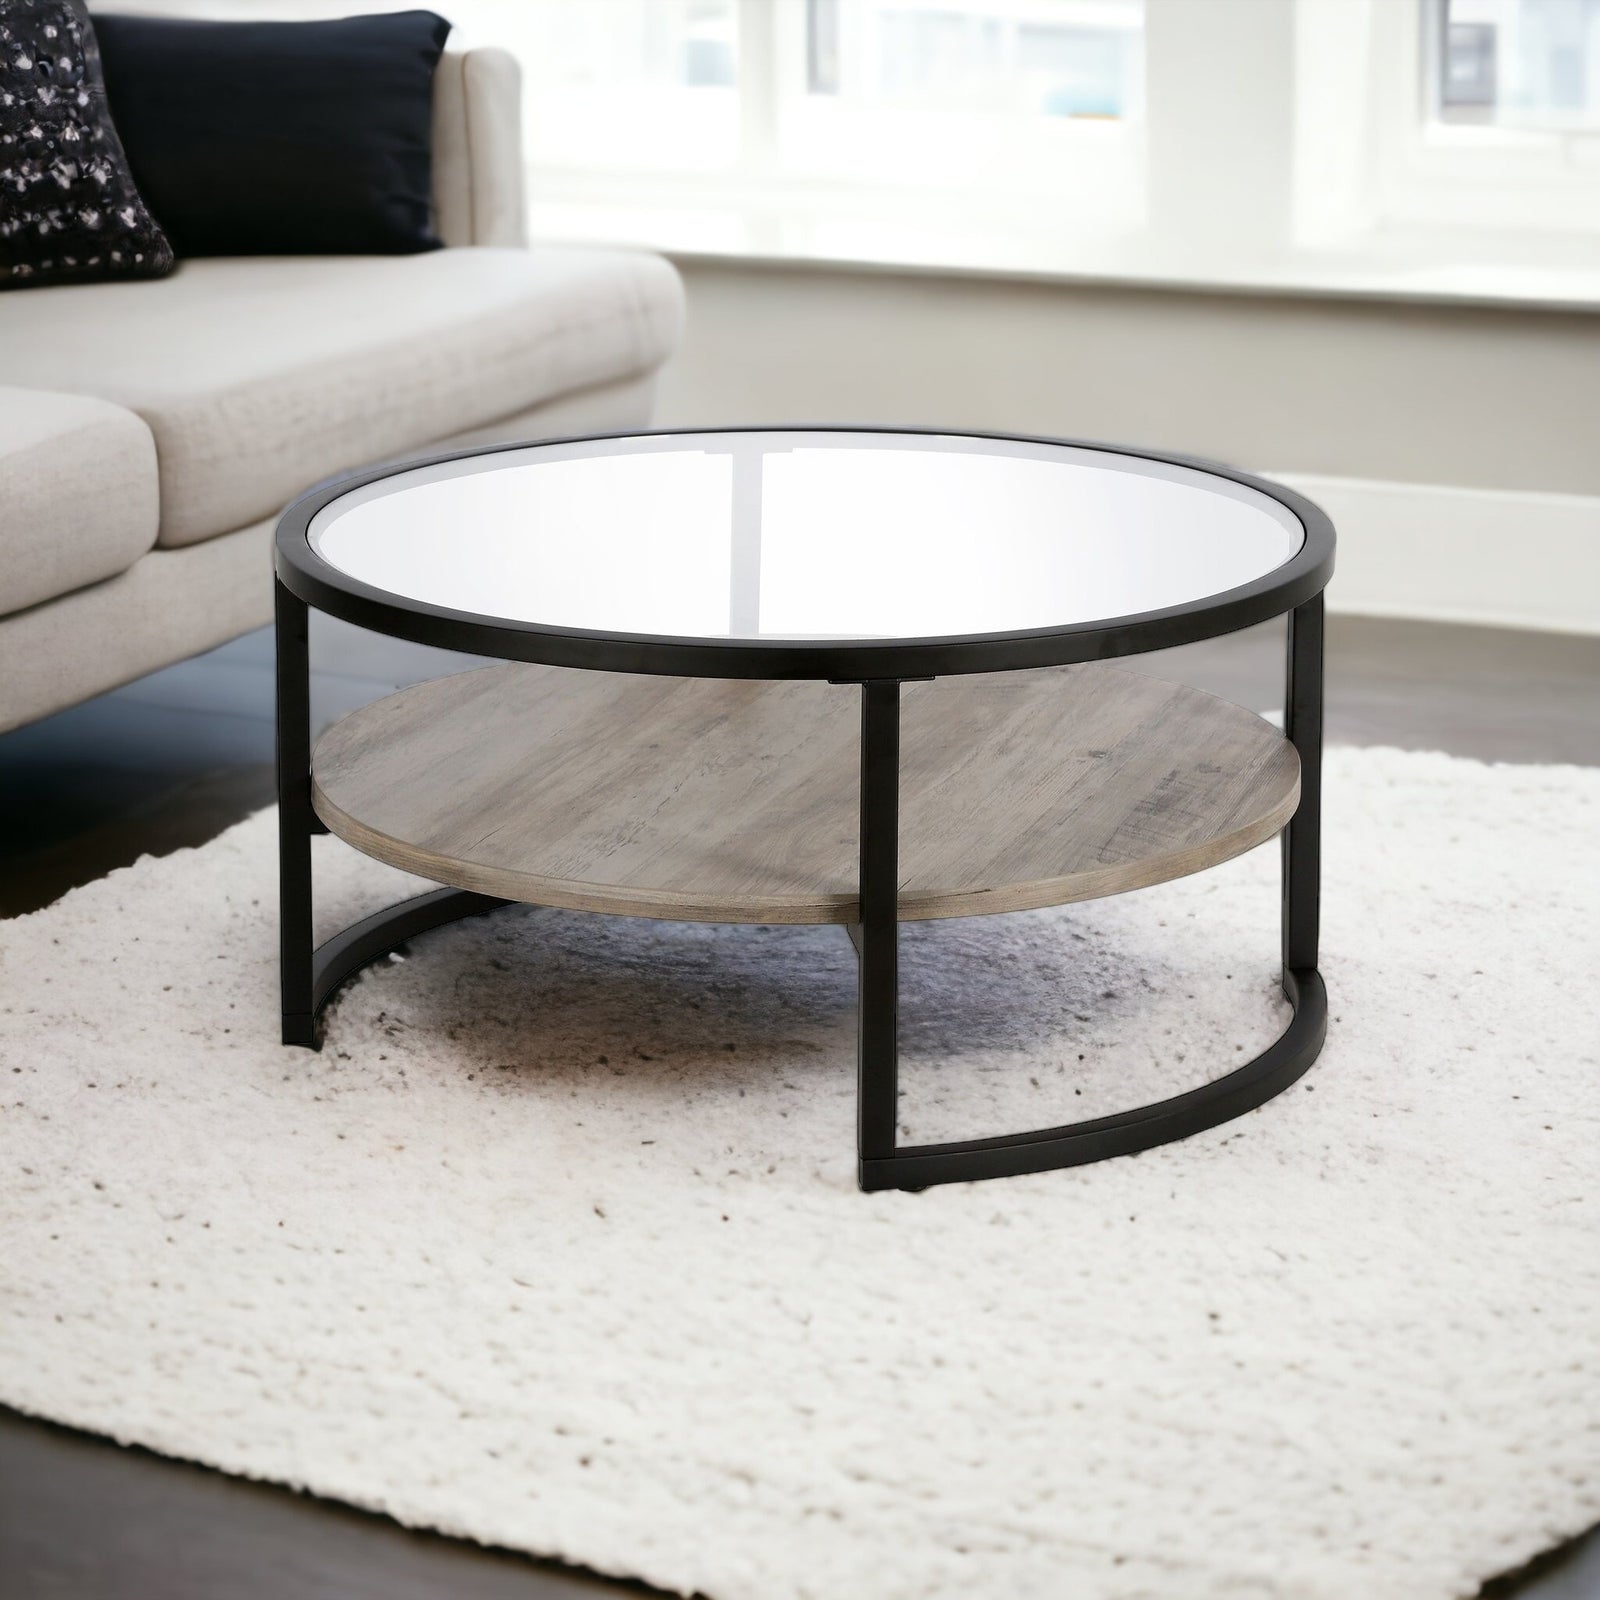 34" Black Glass and Gray Round Coffee Table With Shelf